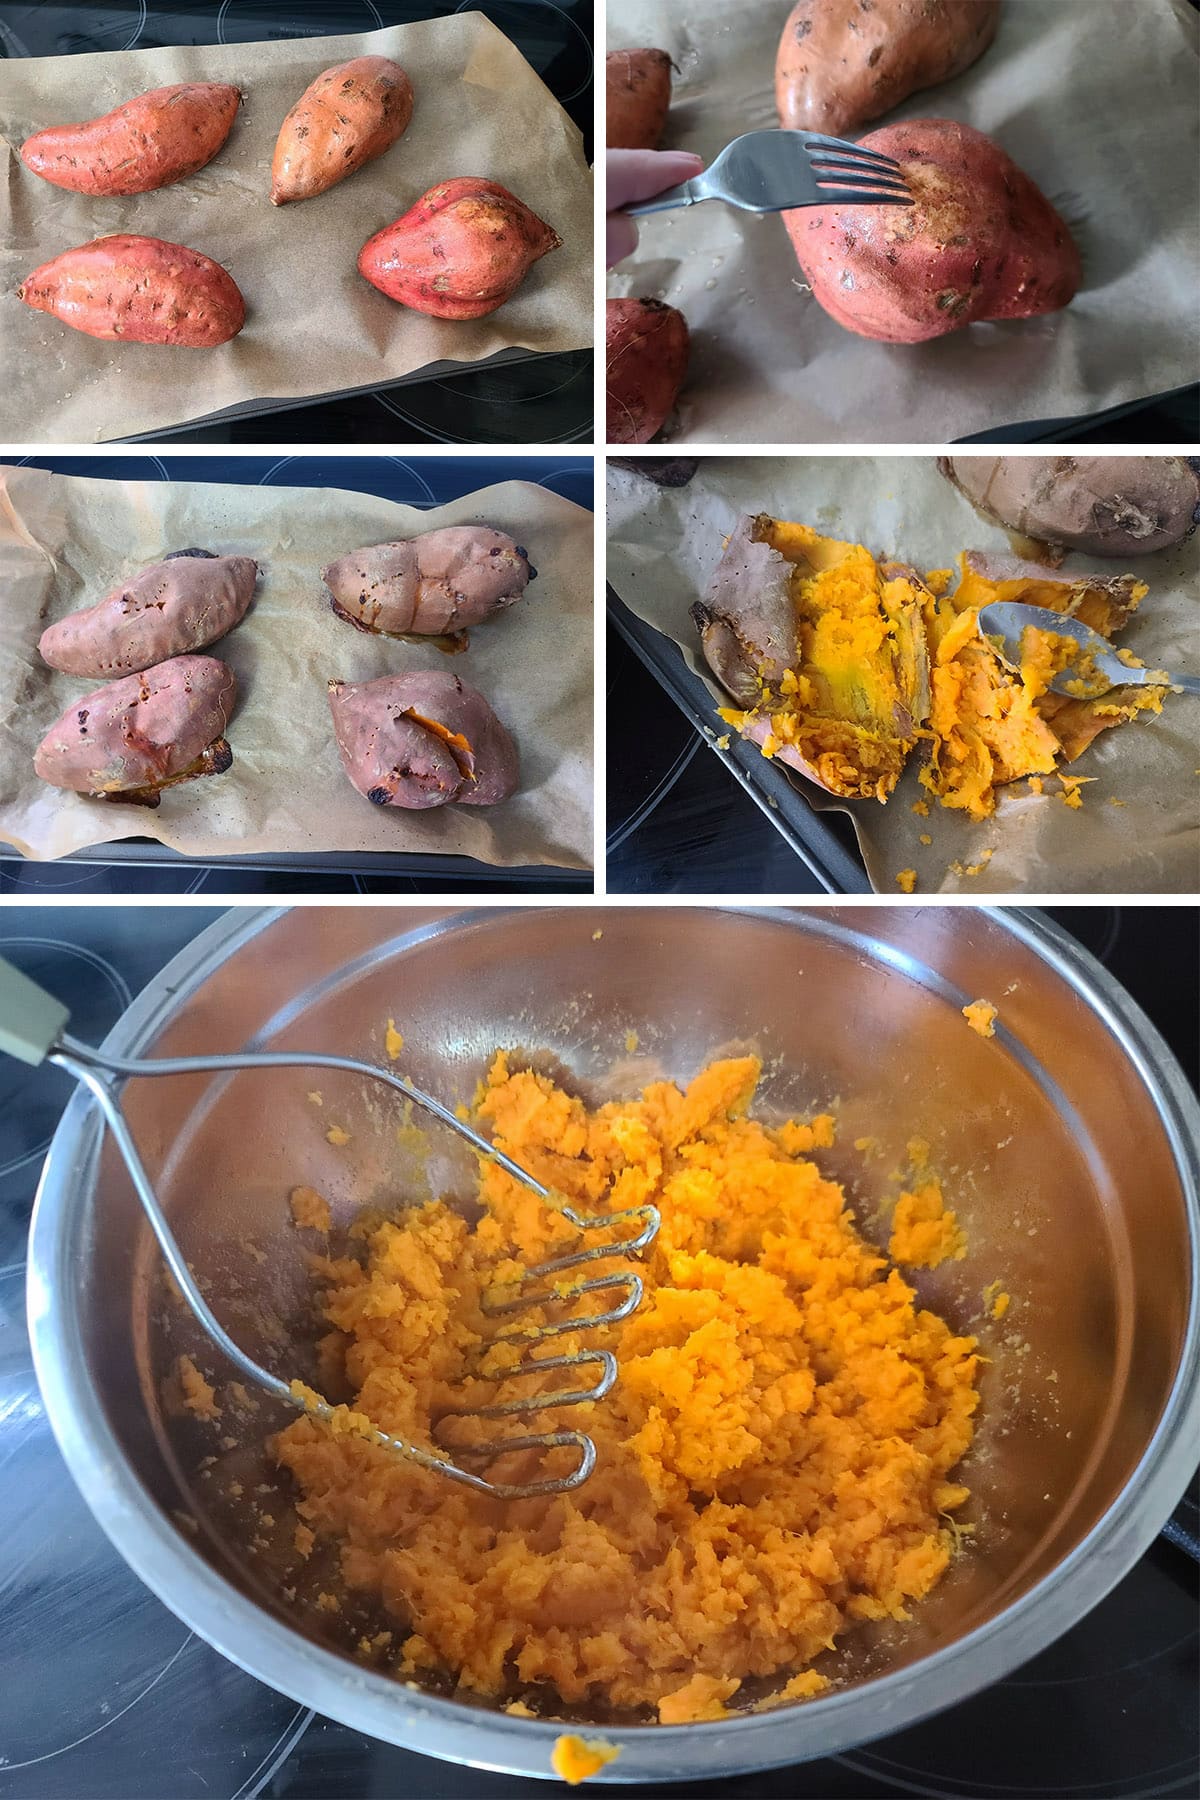 A 5 part image showing the sweet potatoes being roasted, peeled, and mashed.